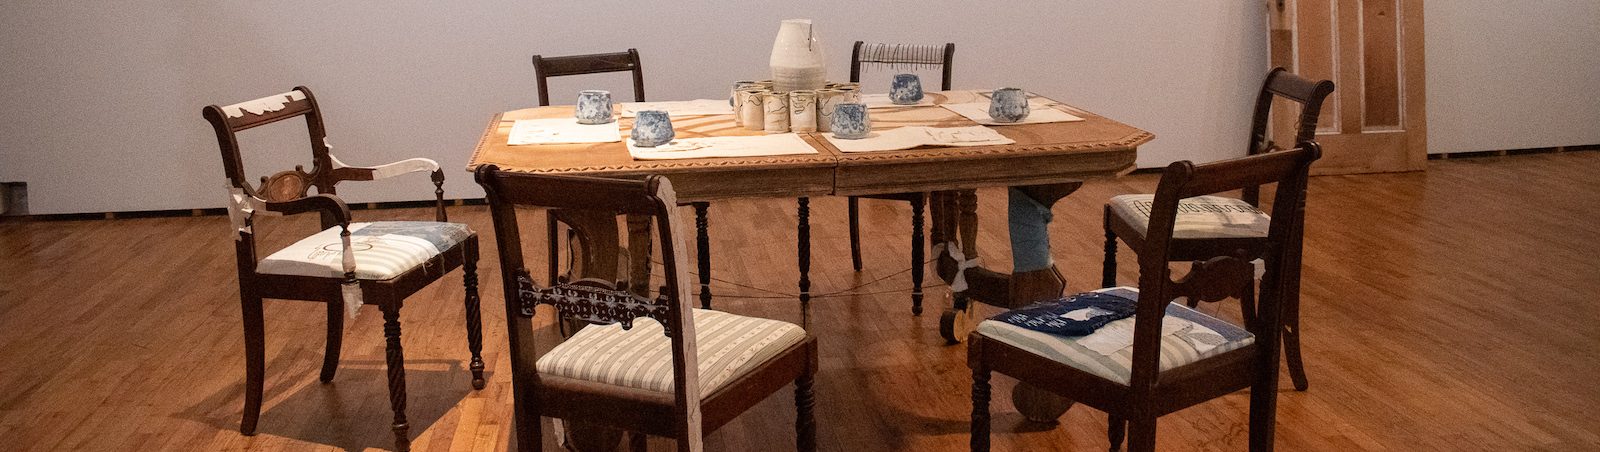 A photo of a dinner table set up at the gallery surrounded by chairs